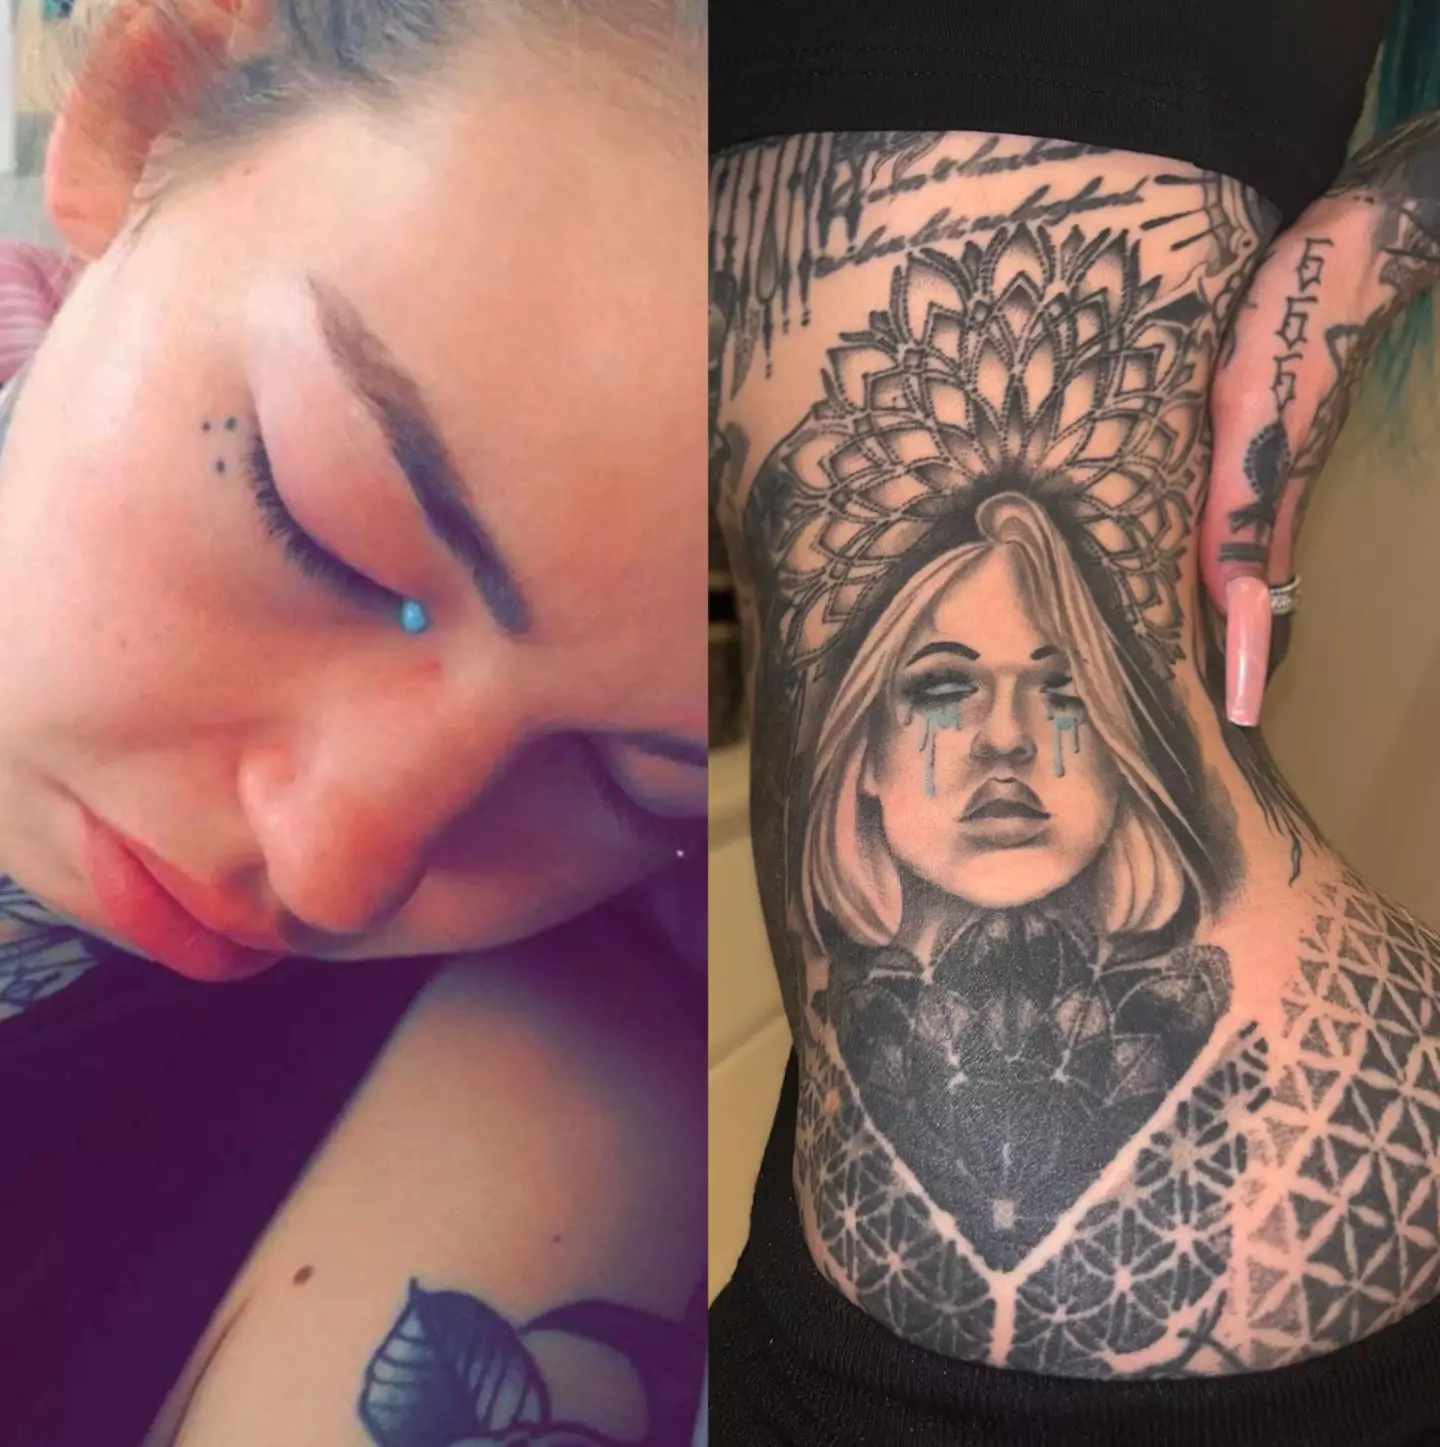 Amber Luke has opened up about her 'traumatic' experience getting her eyeballs tattooed.